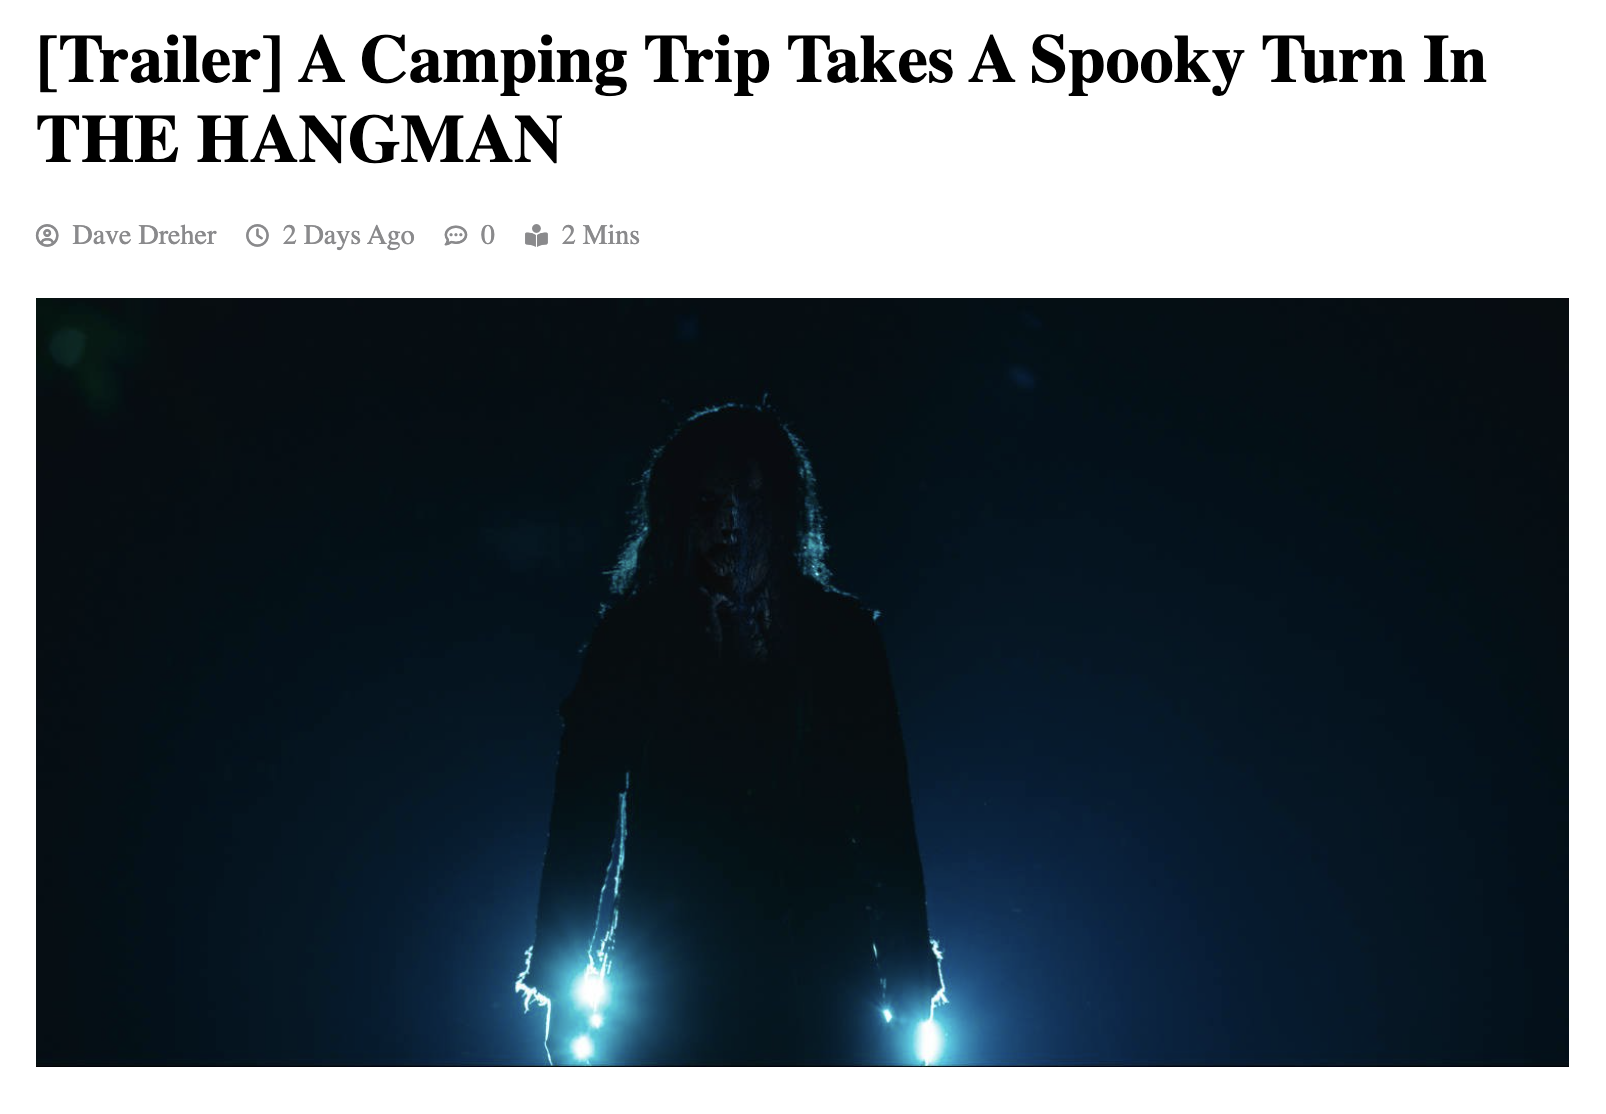 [Trailer] A Camping Trip Takes A Spooky Turn In THE HANGMAN